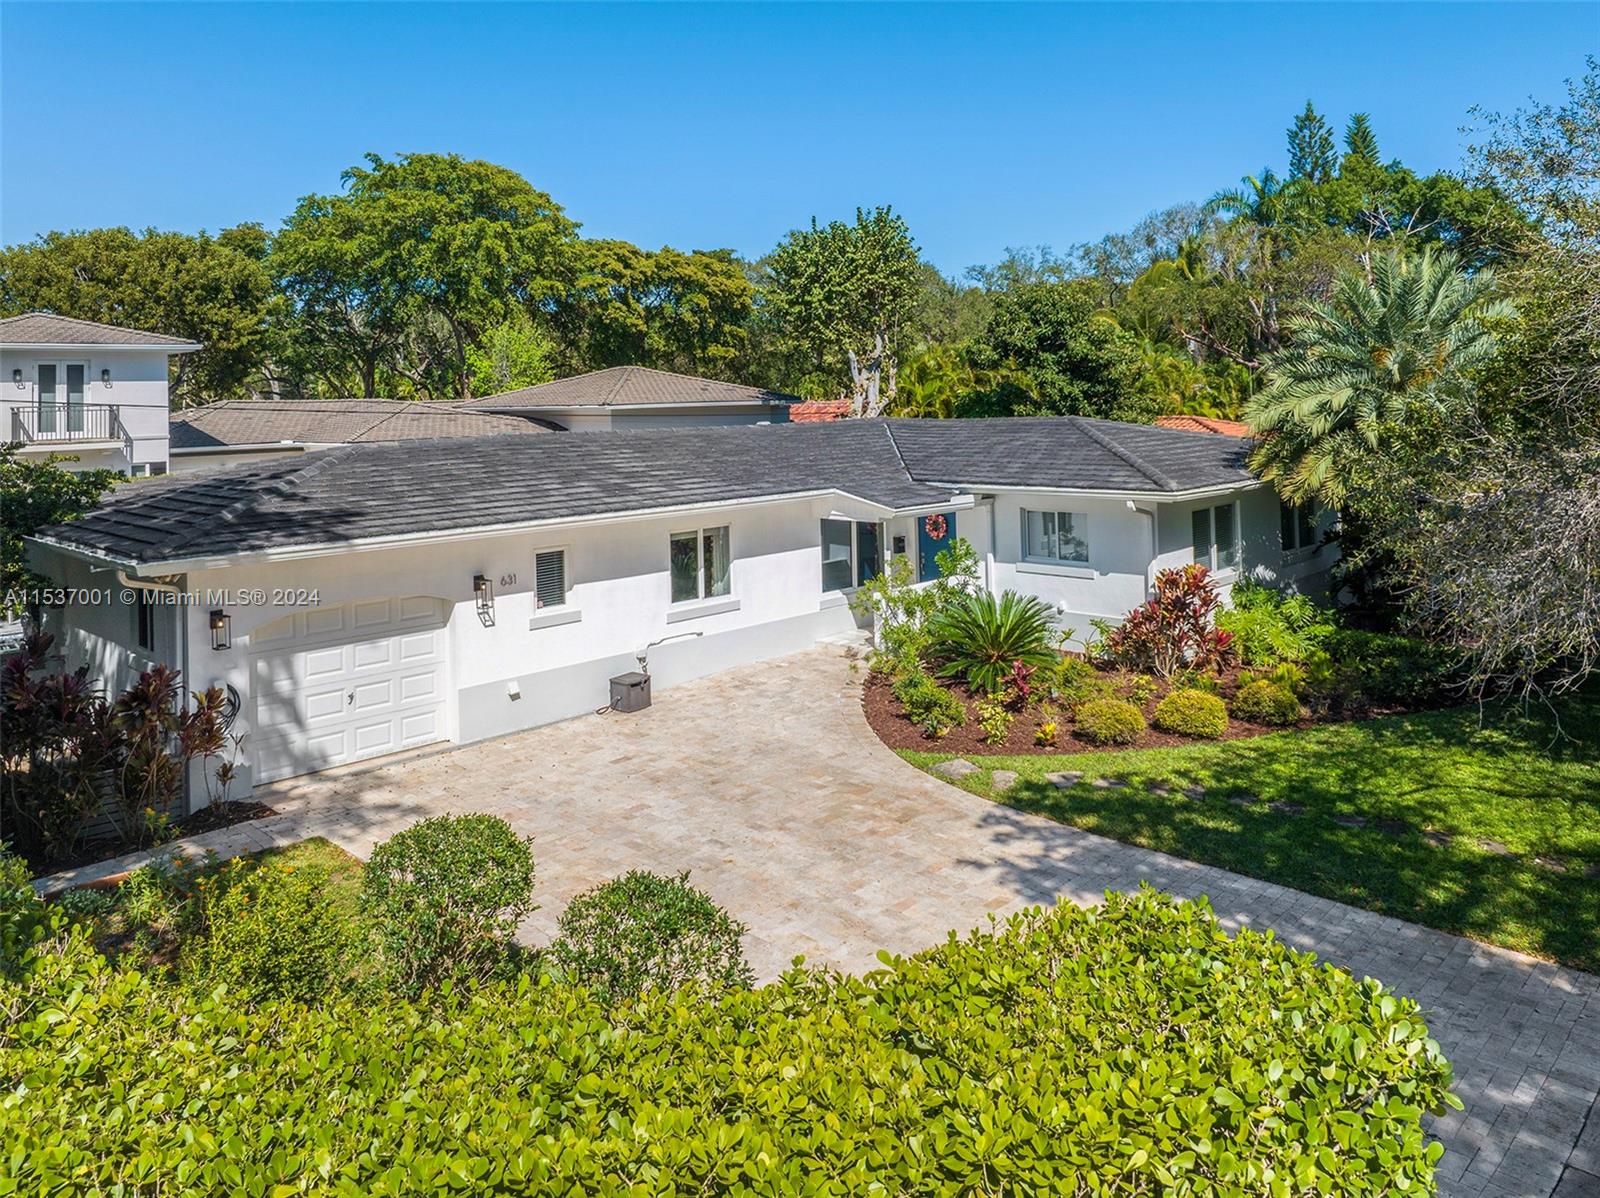 A true gem offered in the sought after Platinum Triangle neighborhood of south Coral Gables. This warm & inviting 4 bedroom, 2 1/2 bath residence sits on a spacious (11,008 SF) corner lot in a quaint tree lined street. Features include an open floor plan w/a multitude of windows that allow for an abundance of natural light throughout, a private bedroom corridor incorporating all four bedrooms, a family room overlooking the pool & backyard, state of the art summer kitchen ideal for entertaining, walled in yard w/artificial grass perfect for kids to enjoy & spacious driveway w/EV charging station. Ideally located w/in close proximity to a variety of excellent schools, Matheson Hammock, Coconut Grove, South Miami, Merrick Park & Miracle Mile.